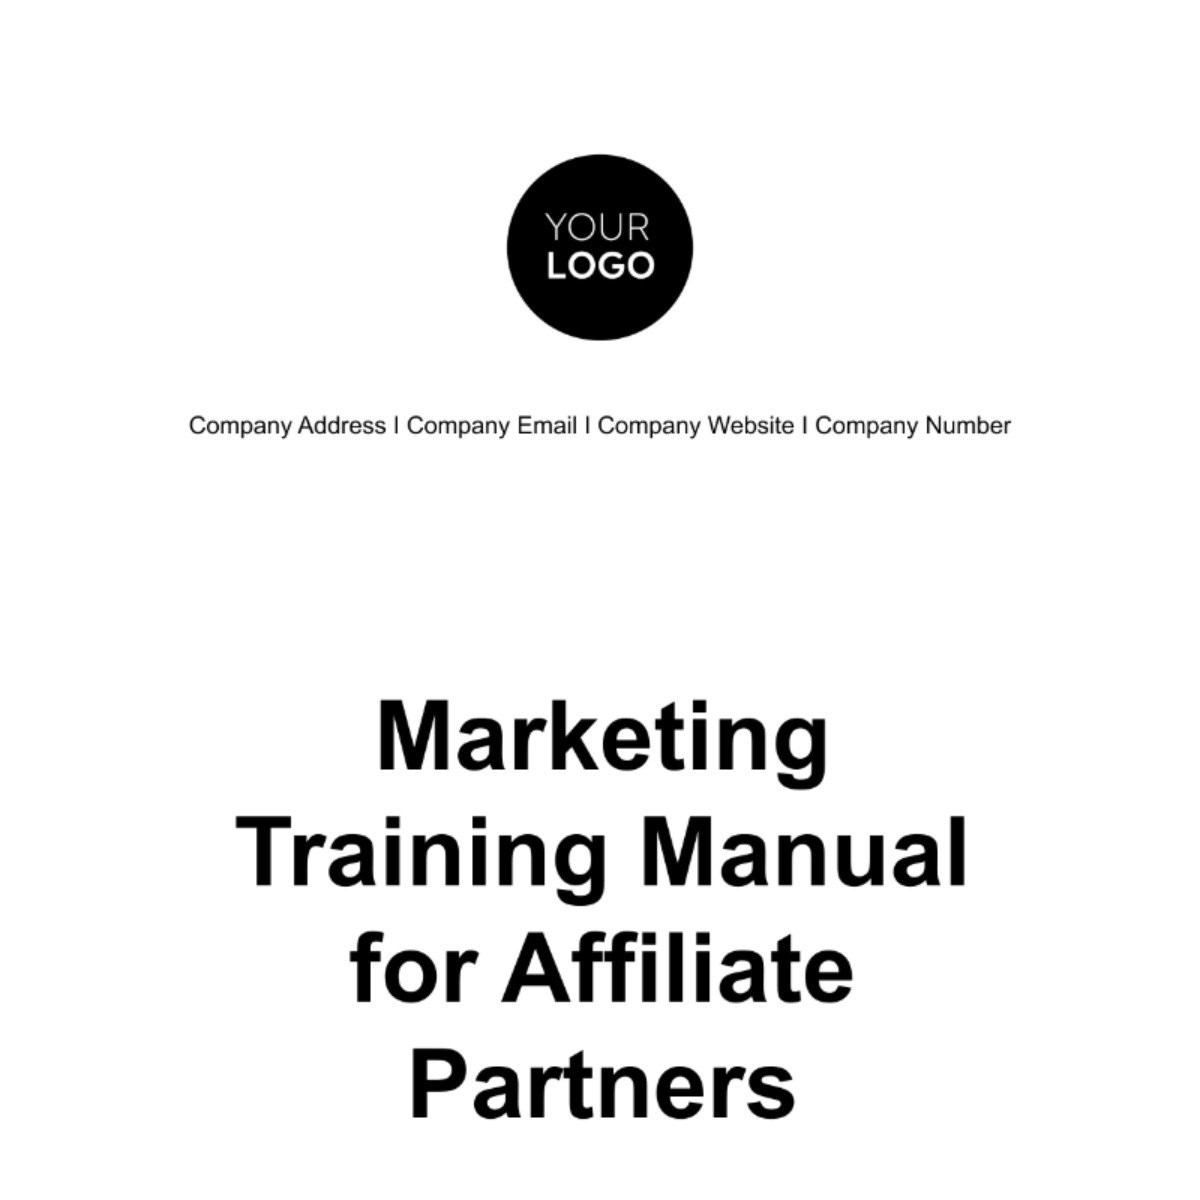 Marketing Training Manual for Affiliate Partners Template